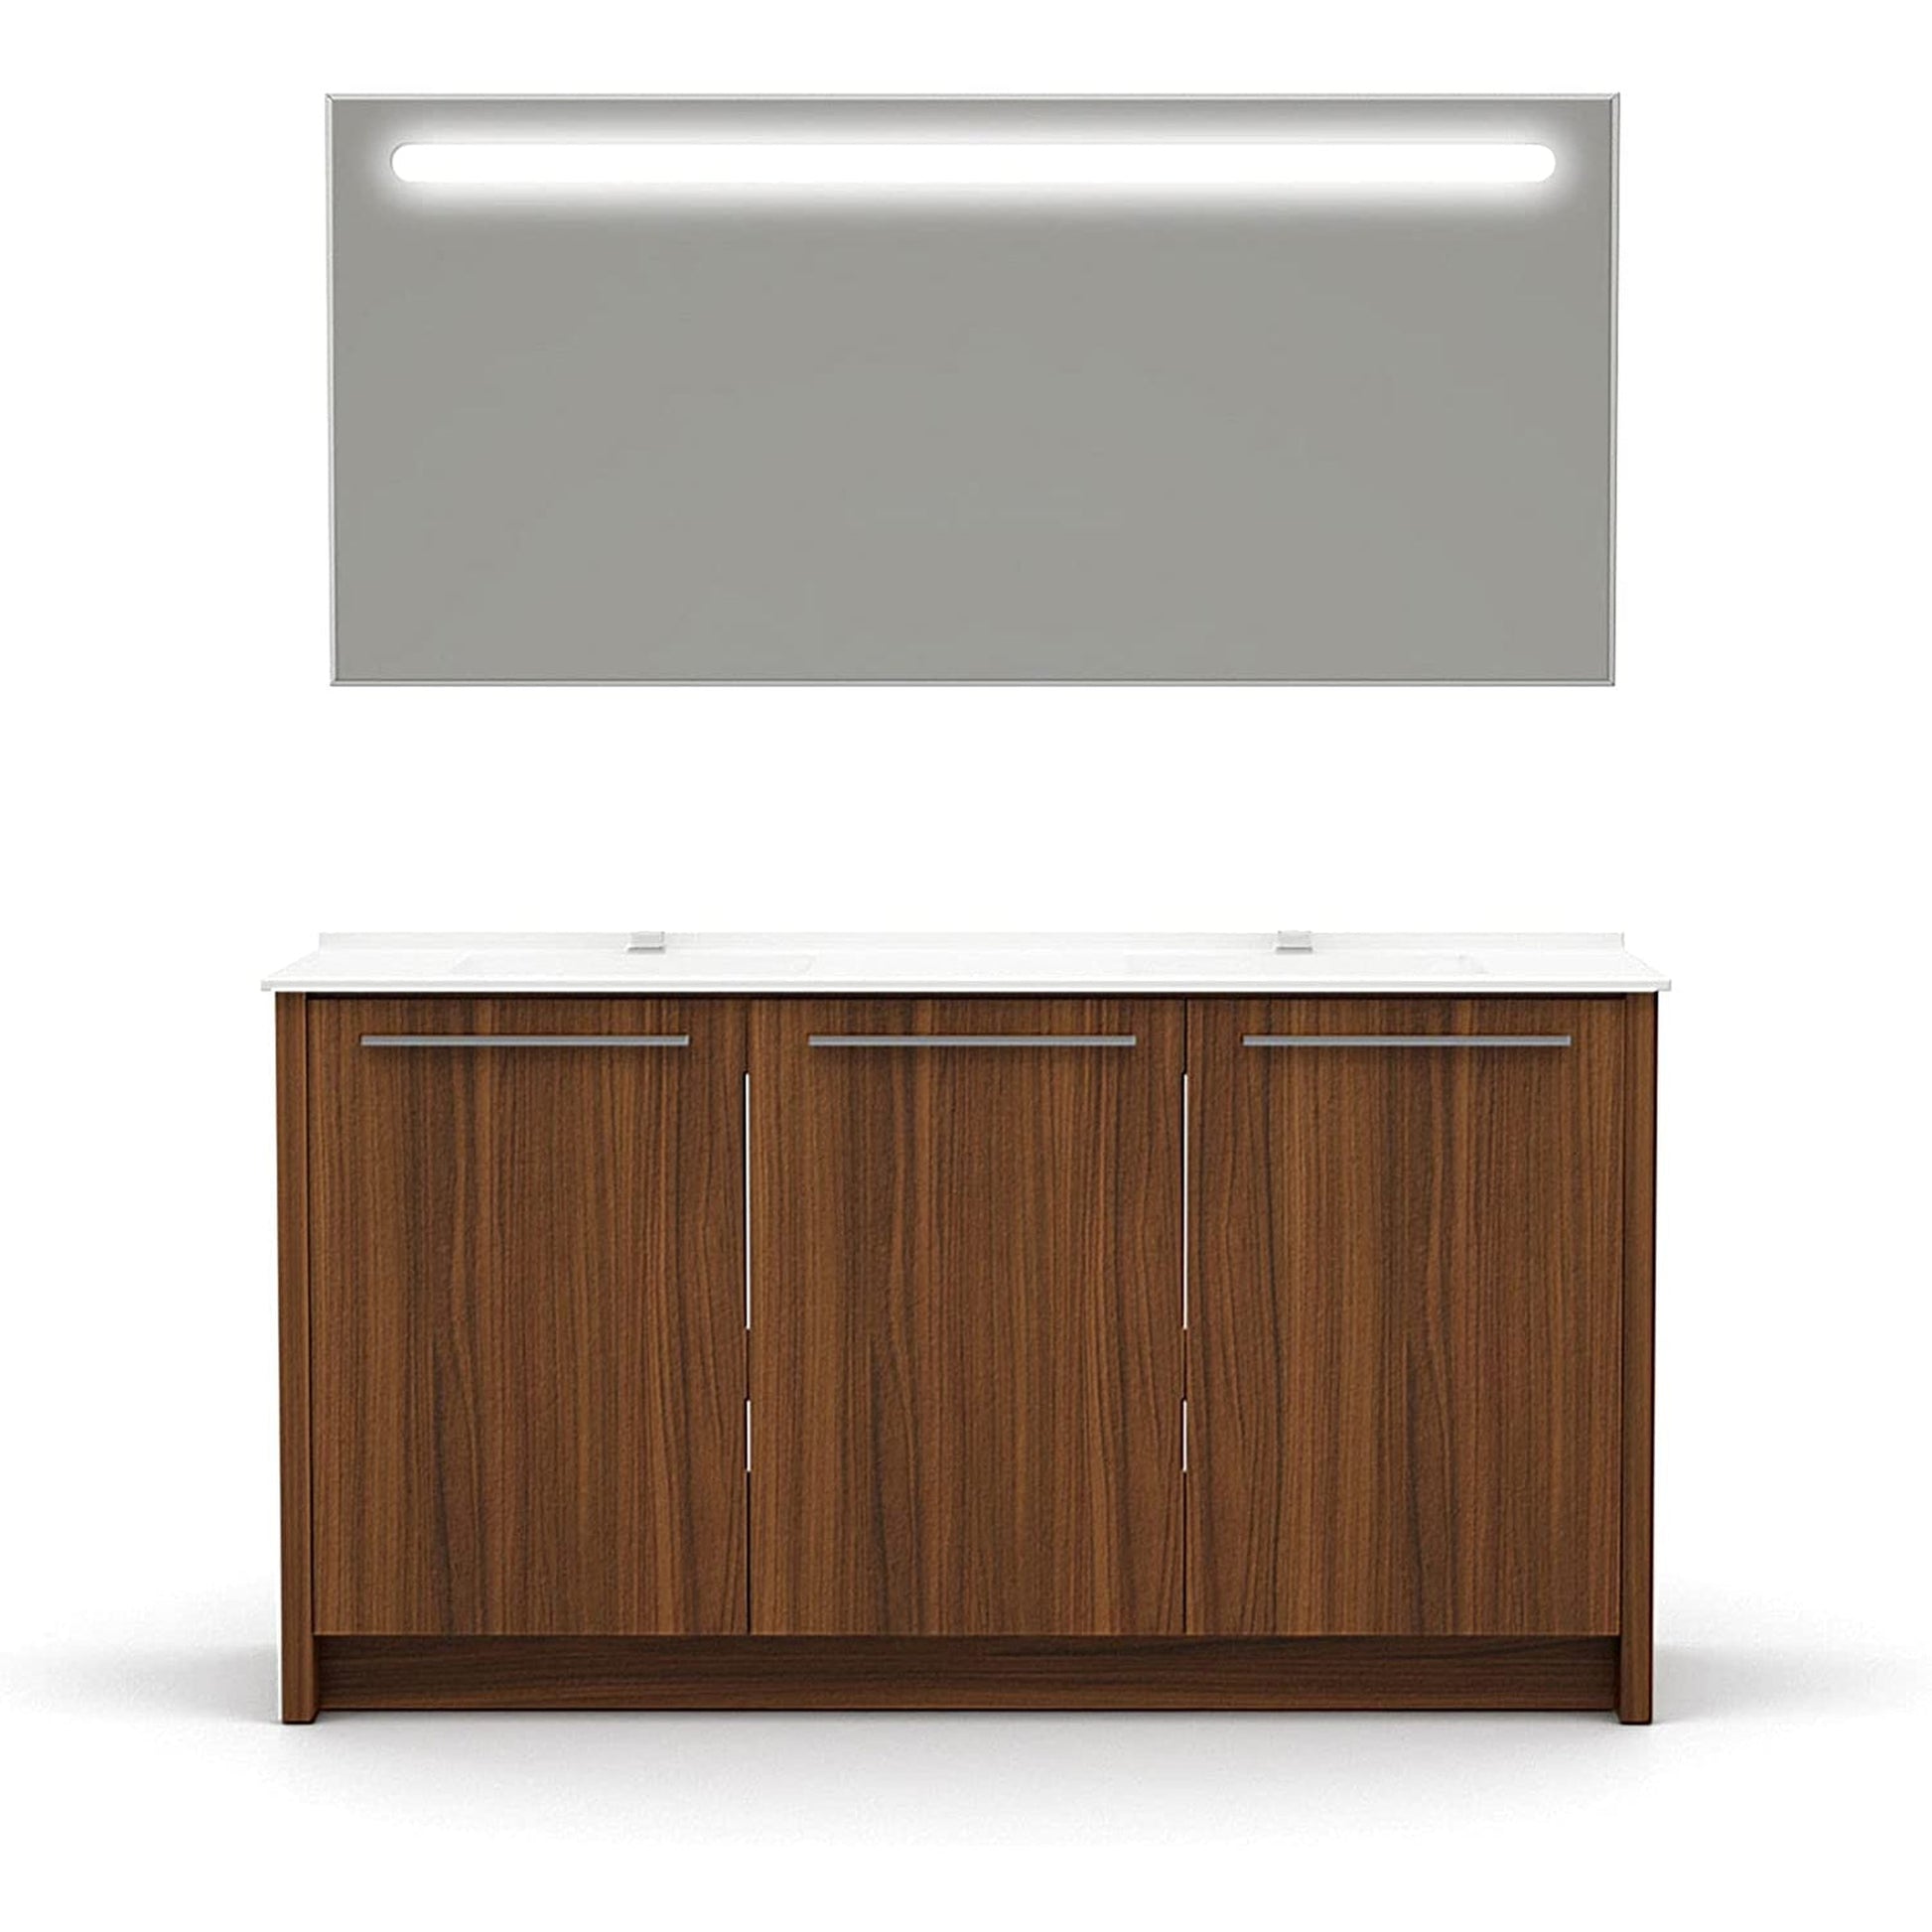 Casa Mare Benna 63" Matte Walnut Bathroom Vanity and Acrylic Double Sink Combo with LED Mirror